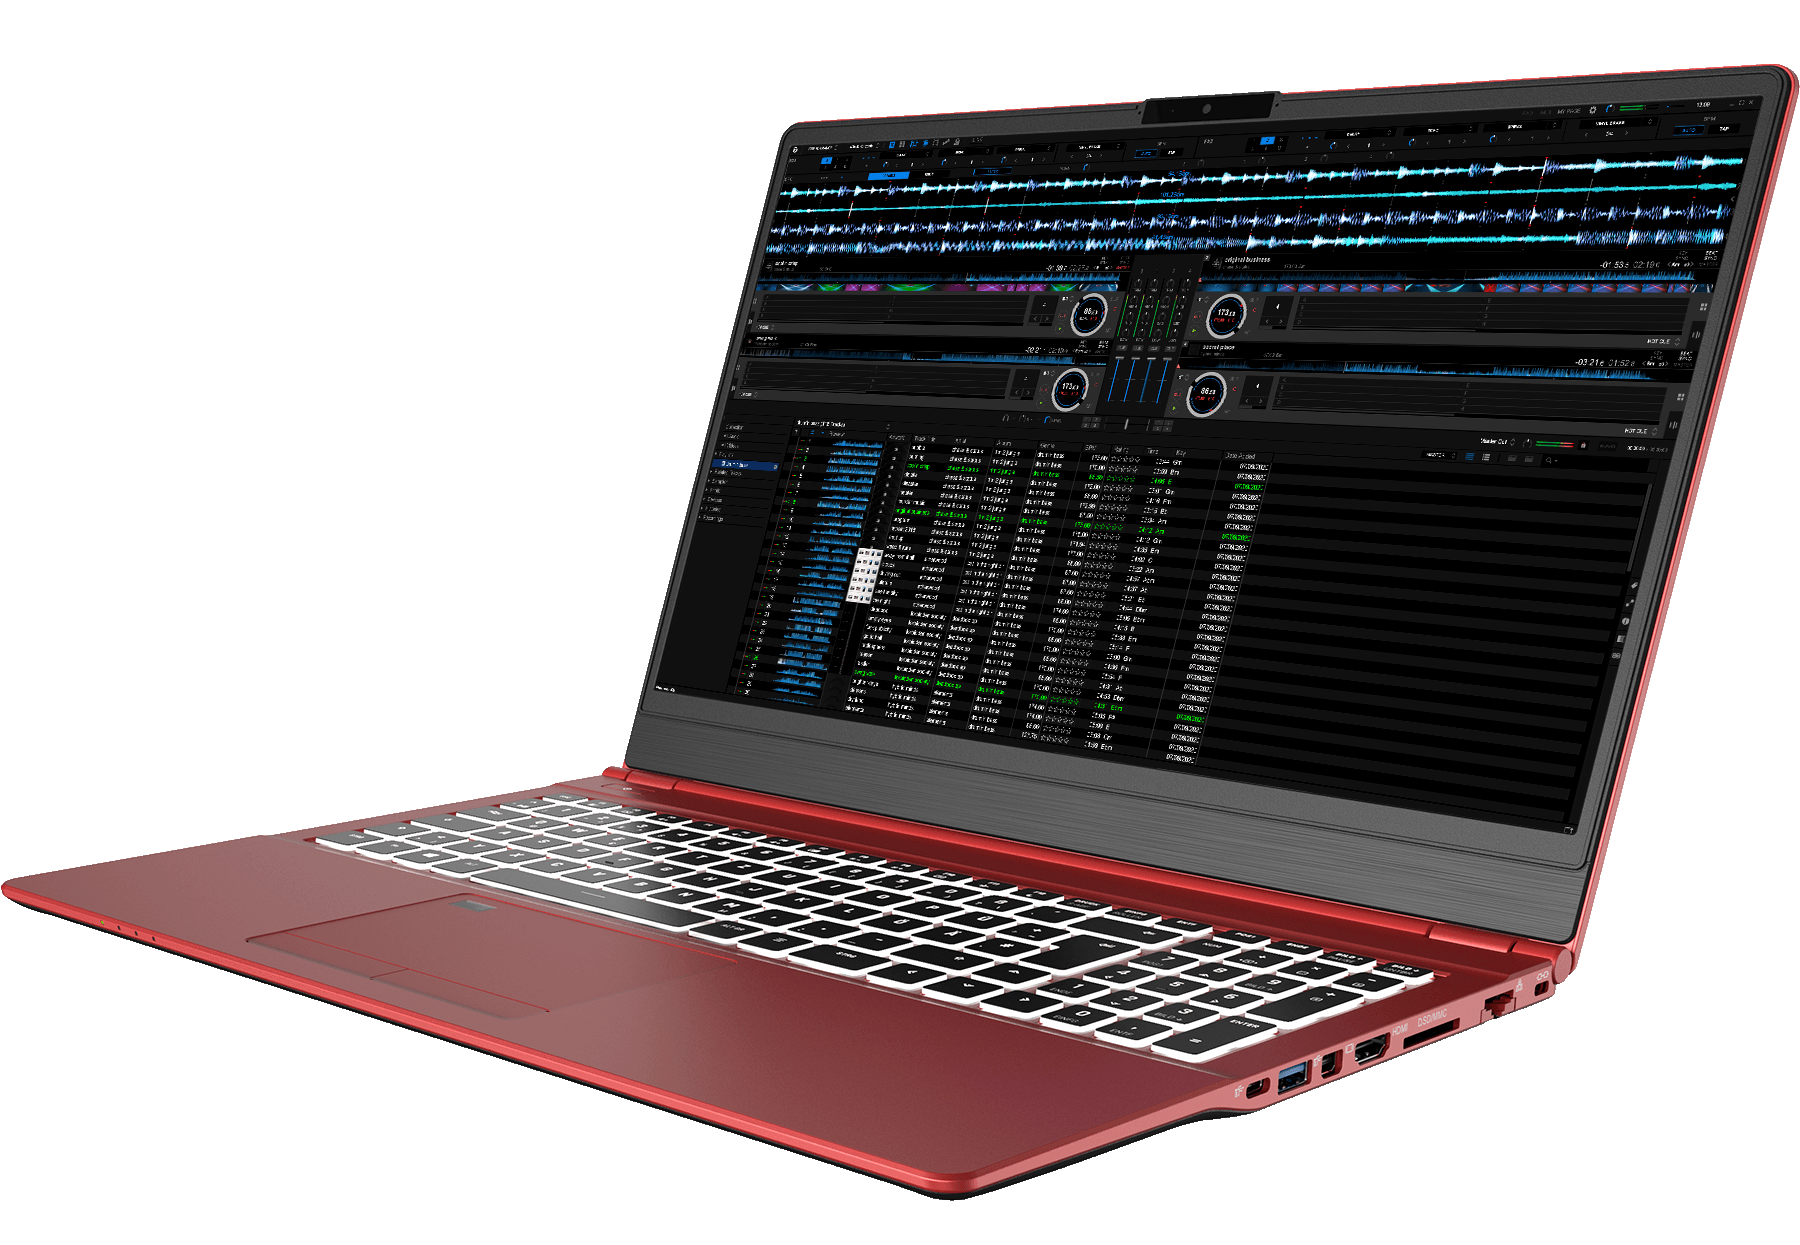 oprindelse Oversigt respons A 15-inch Thin Laptop For The Road: No More Dongles With The XMG DJ 15